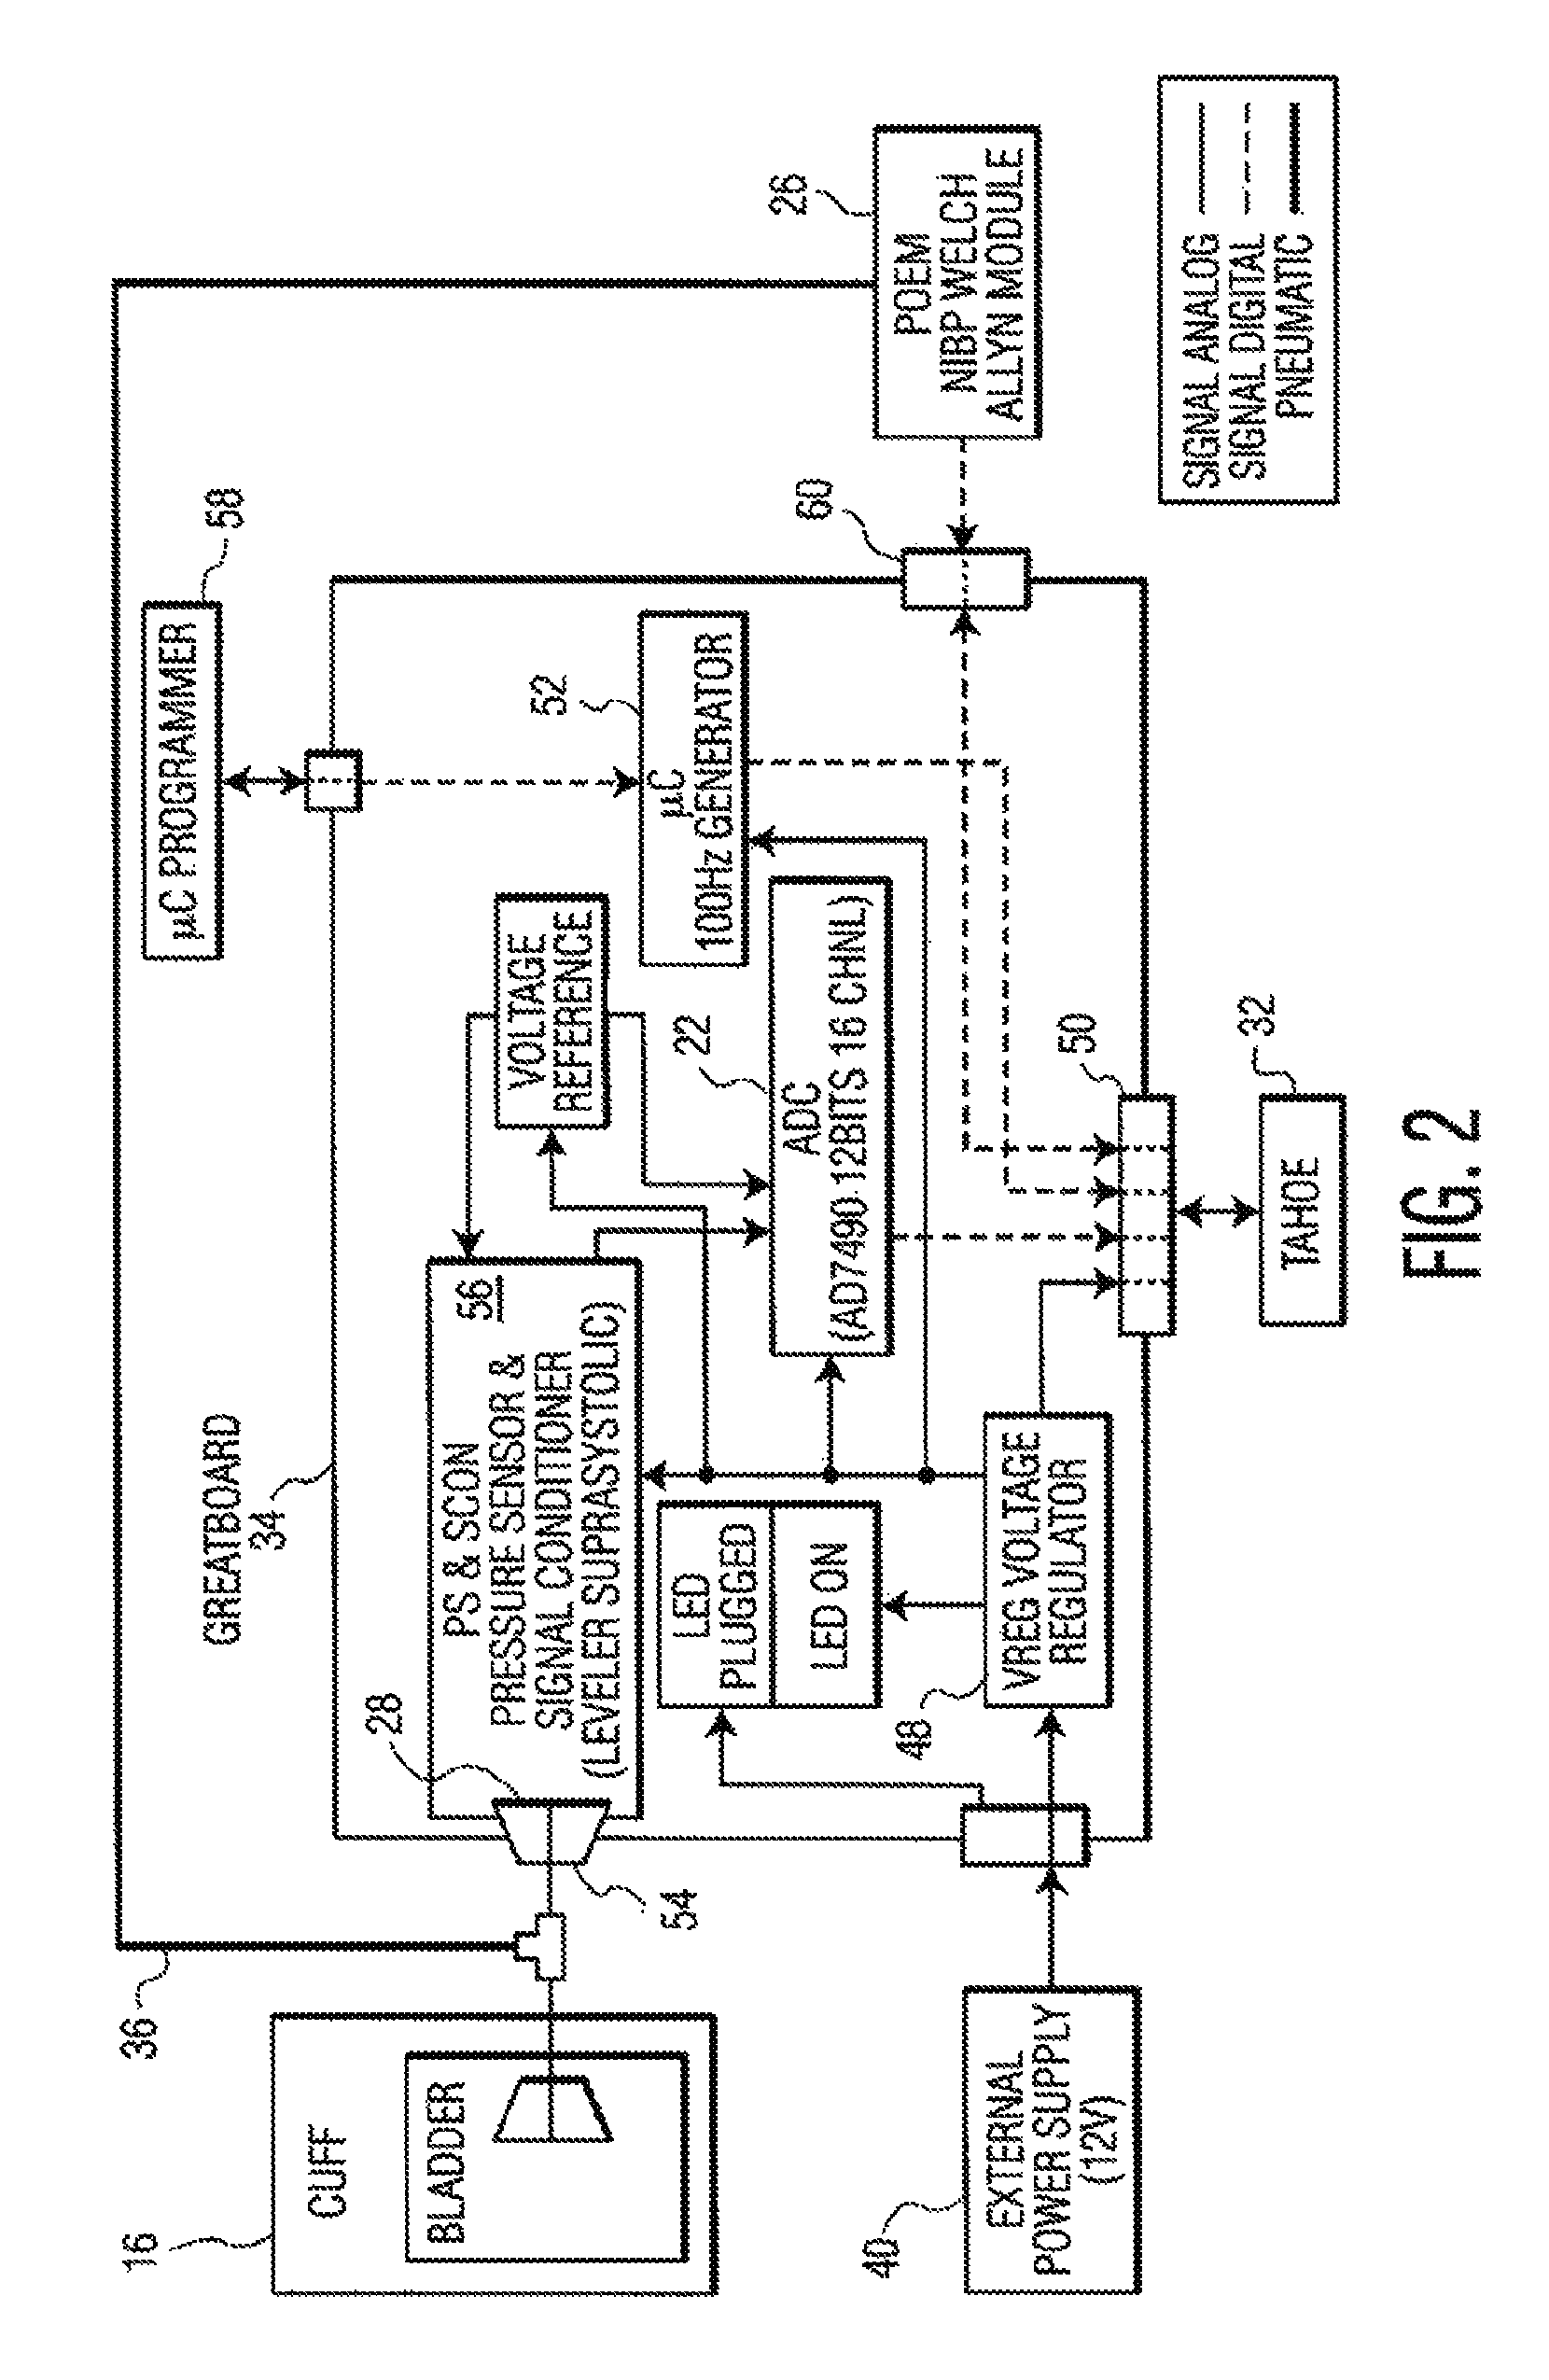 Method and apparatus for producing a central pressure waveform in an oscillometric blood pressure system